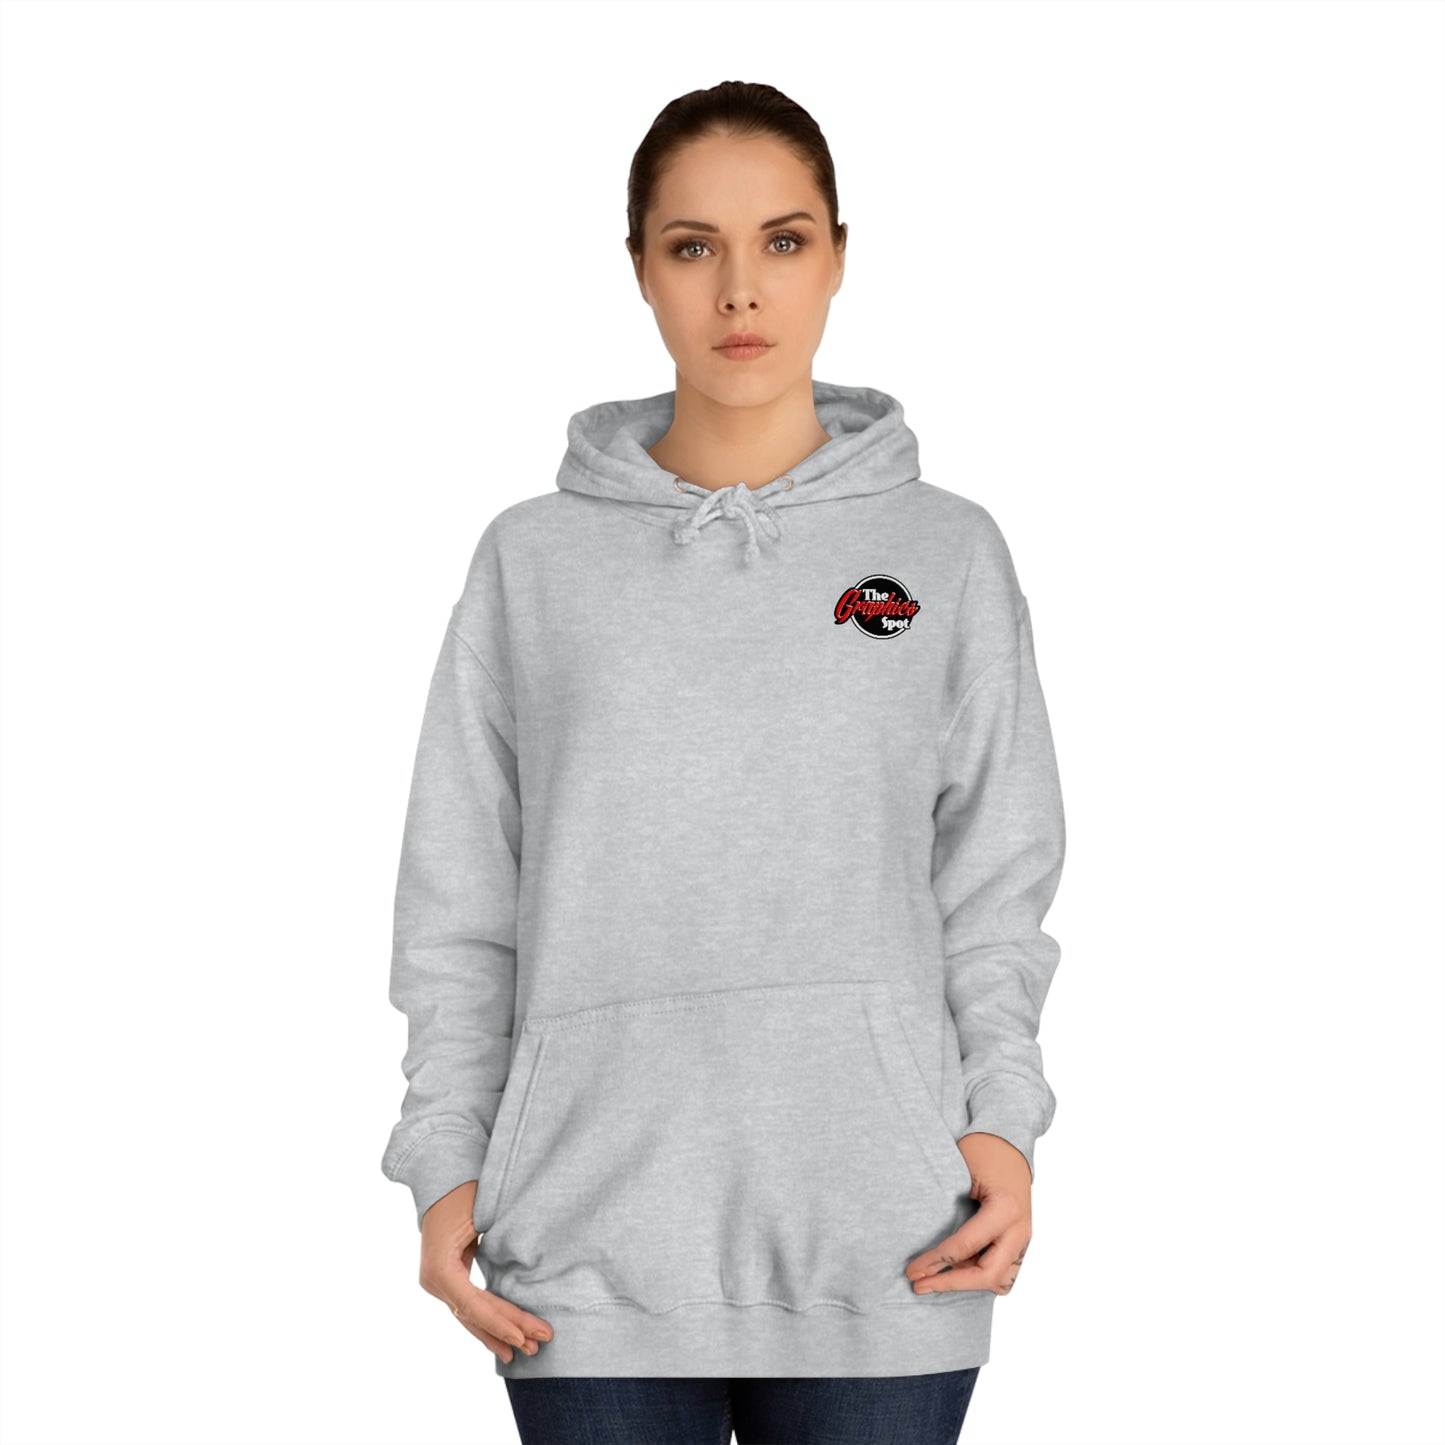 The Graphics Spot Med/Heavy Hoodie